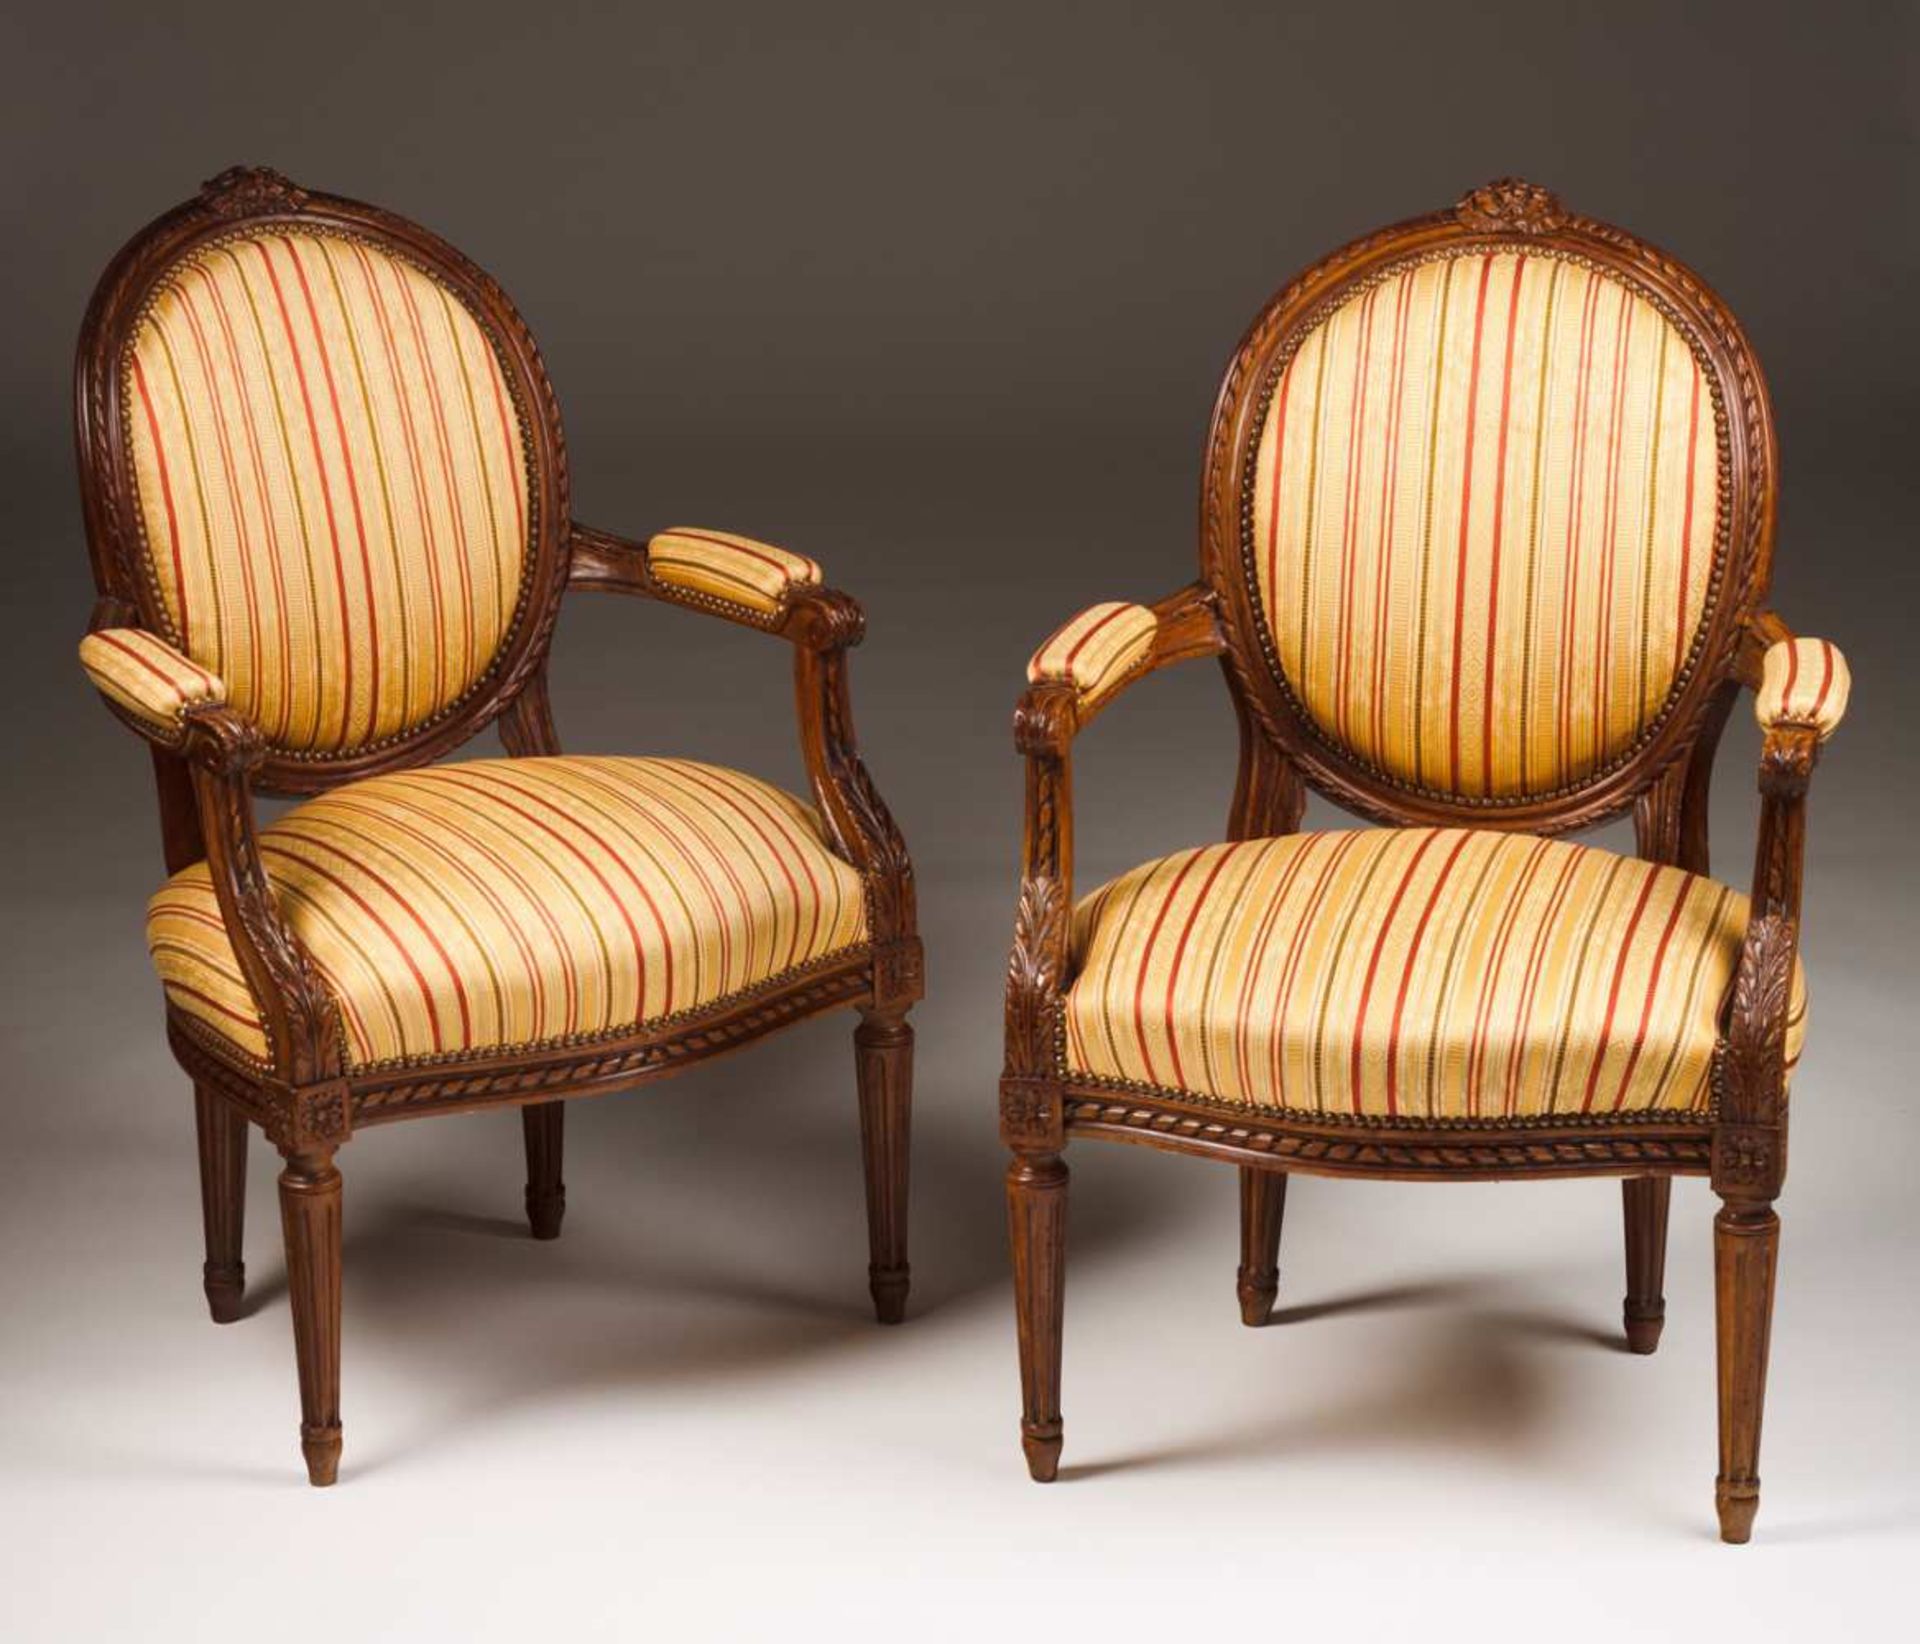 A pair of Louis XVI style fauteuils Walnut Carved decoration with floral motifs and ribbons